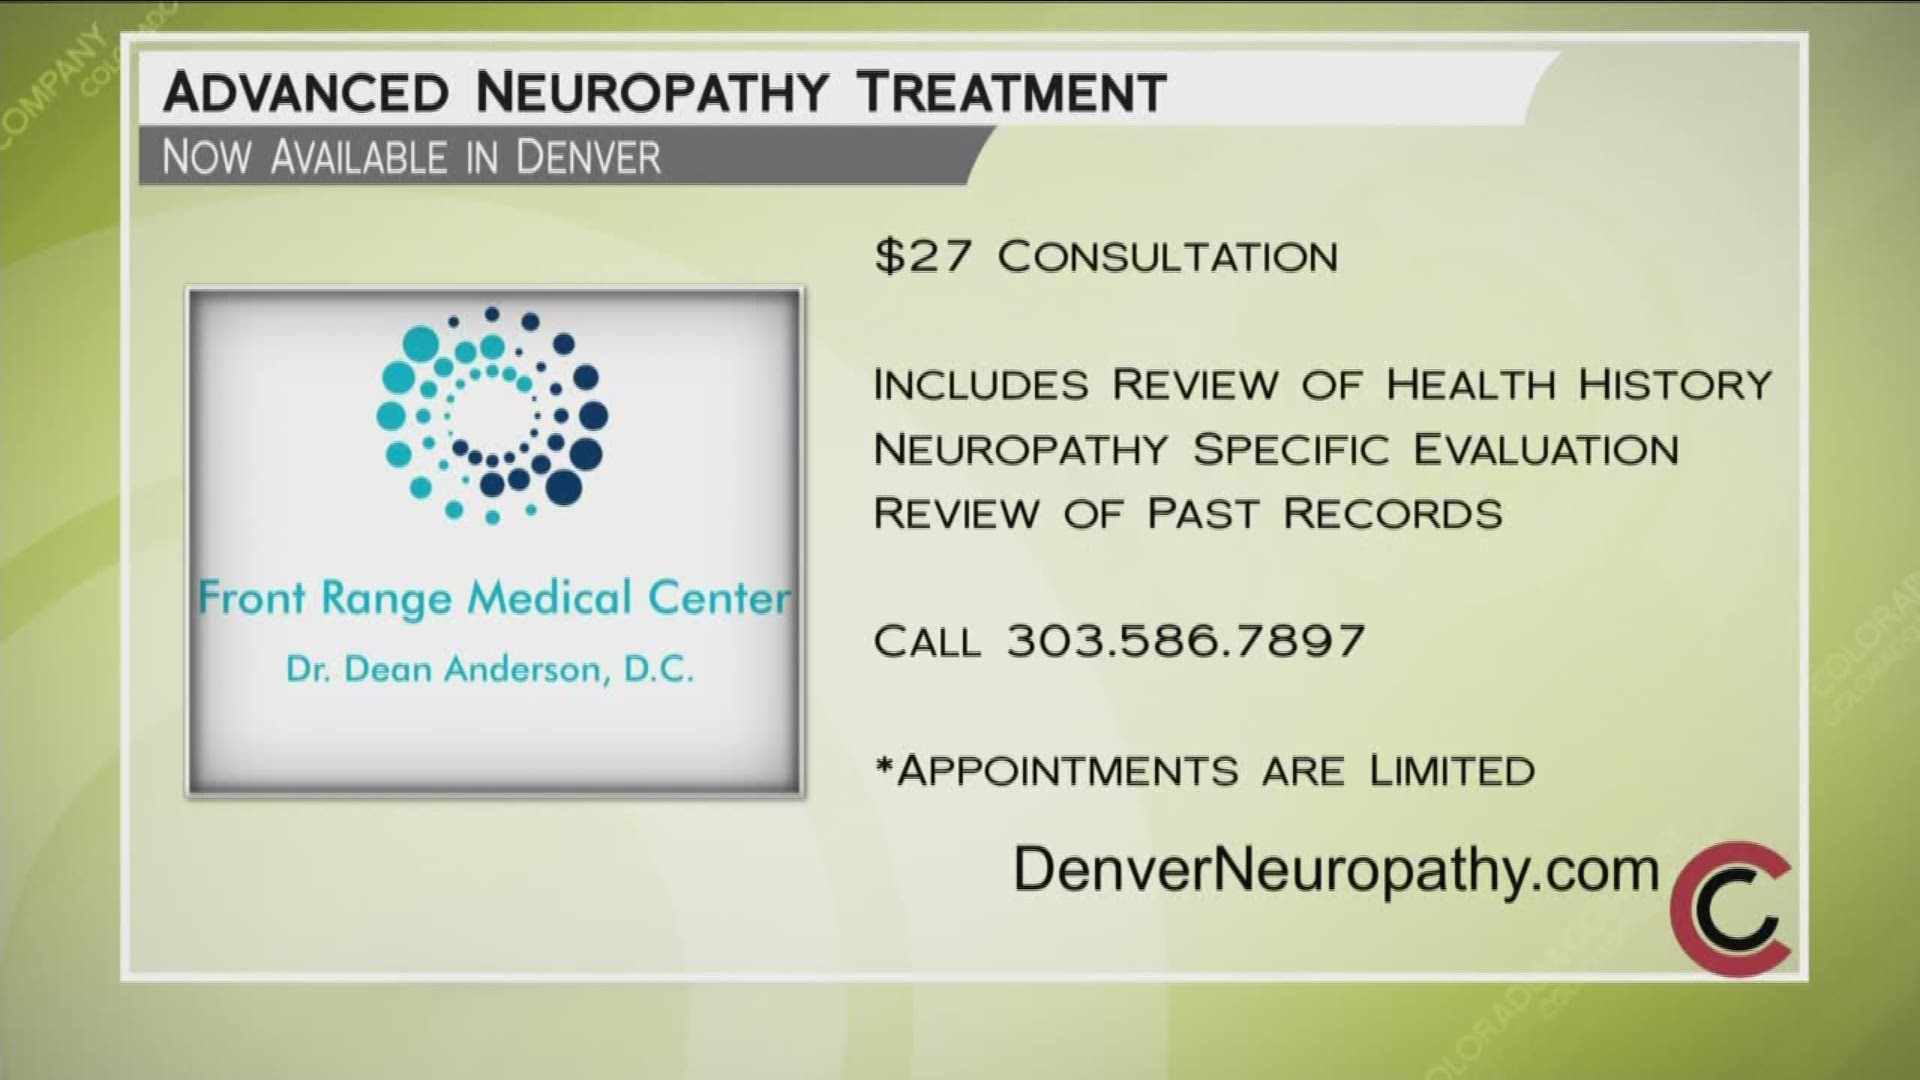 Schedule a consultation with Dr. Anderson for only $27 and find out if his treatment can help you. Learn more at www.DenverNeuropathy.com or call 303.586.7897.